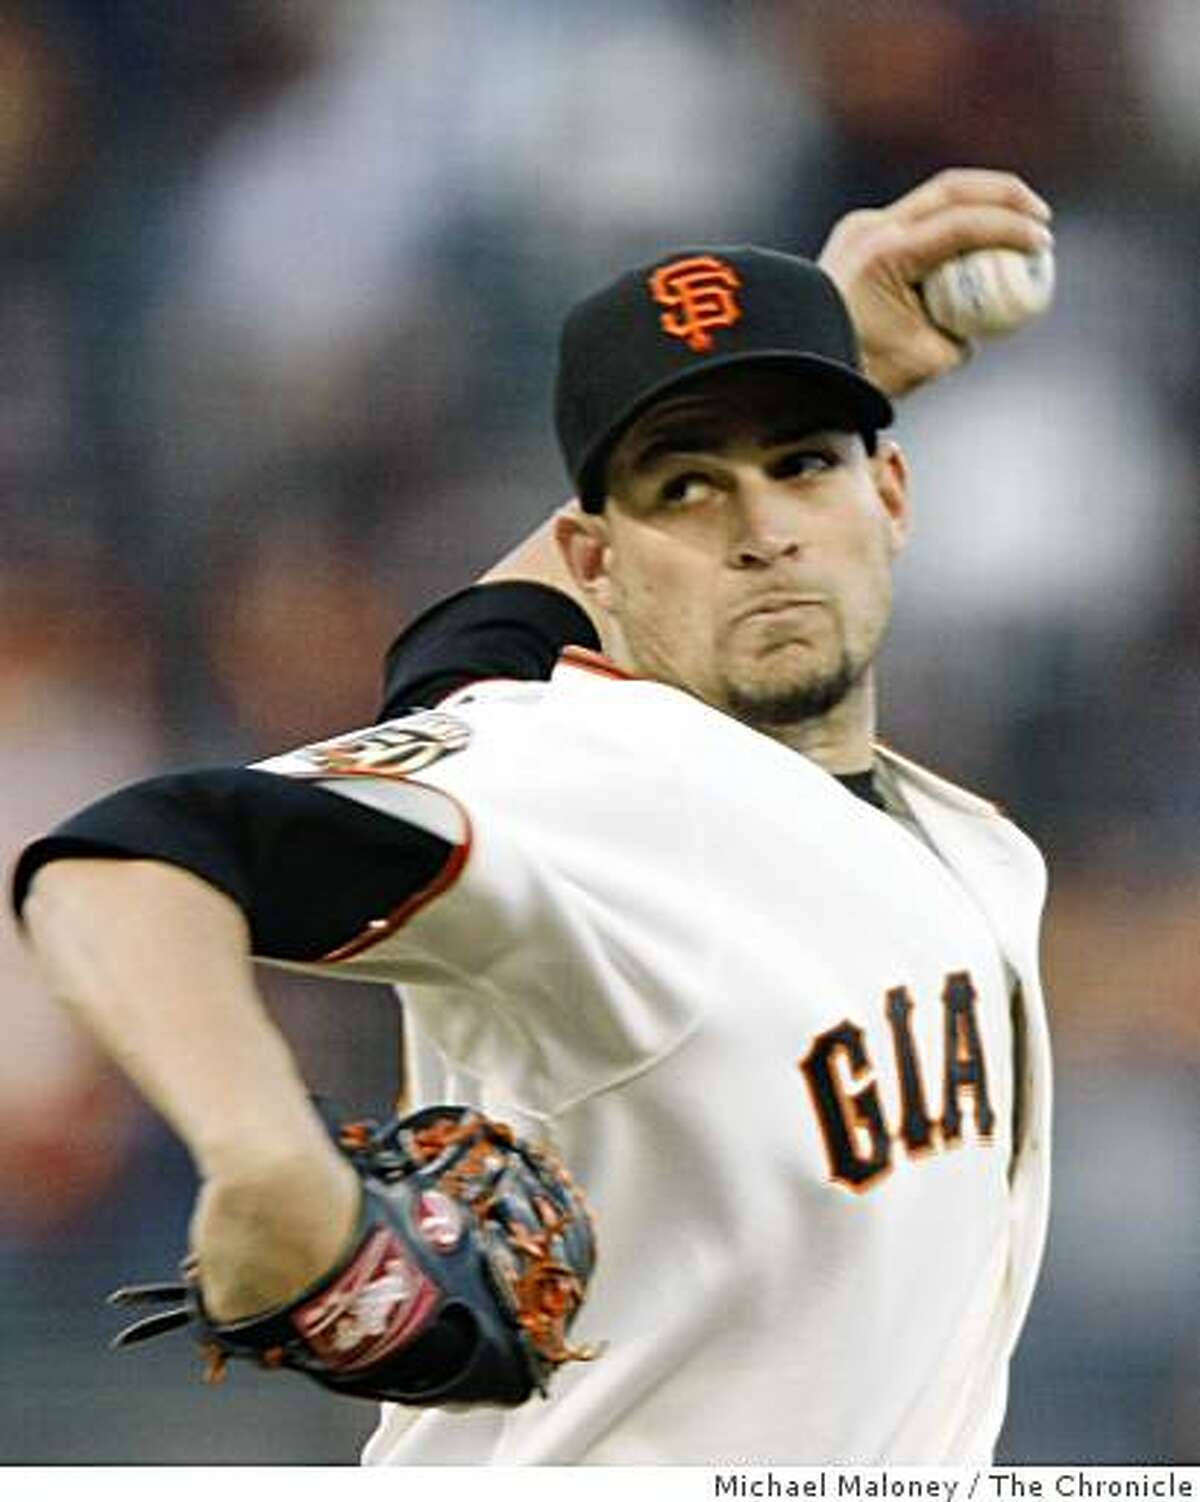 San Francisco Giants starting pitcher Jonathan Sanchez pitches in the first inning.The San Francisco Giants host te Arizona Diamondbacks in a MLB game at AT&T Park in San Francisco, Calif., on April 14, 2008.Photo by Michael Maloney / San Francisco Chronicle